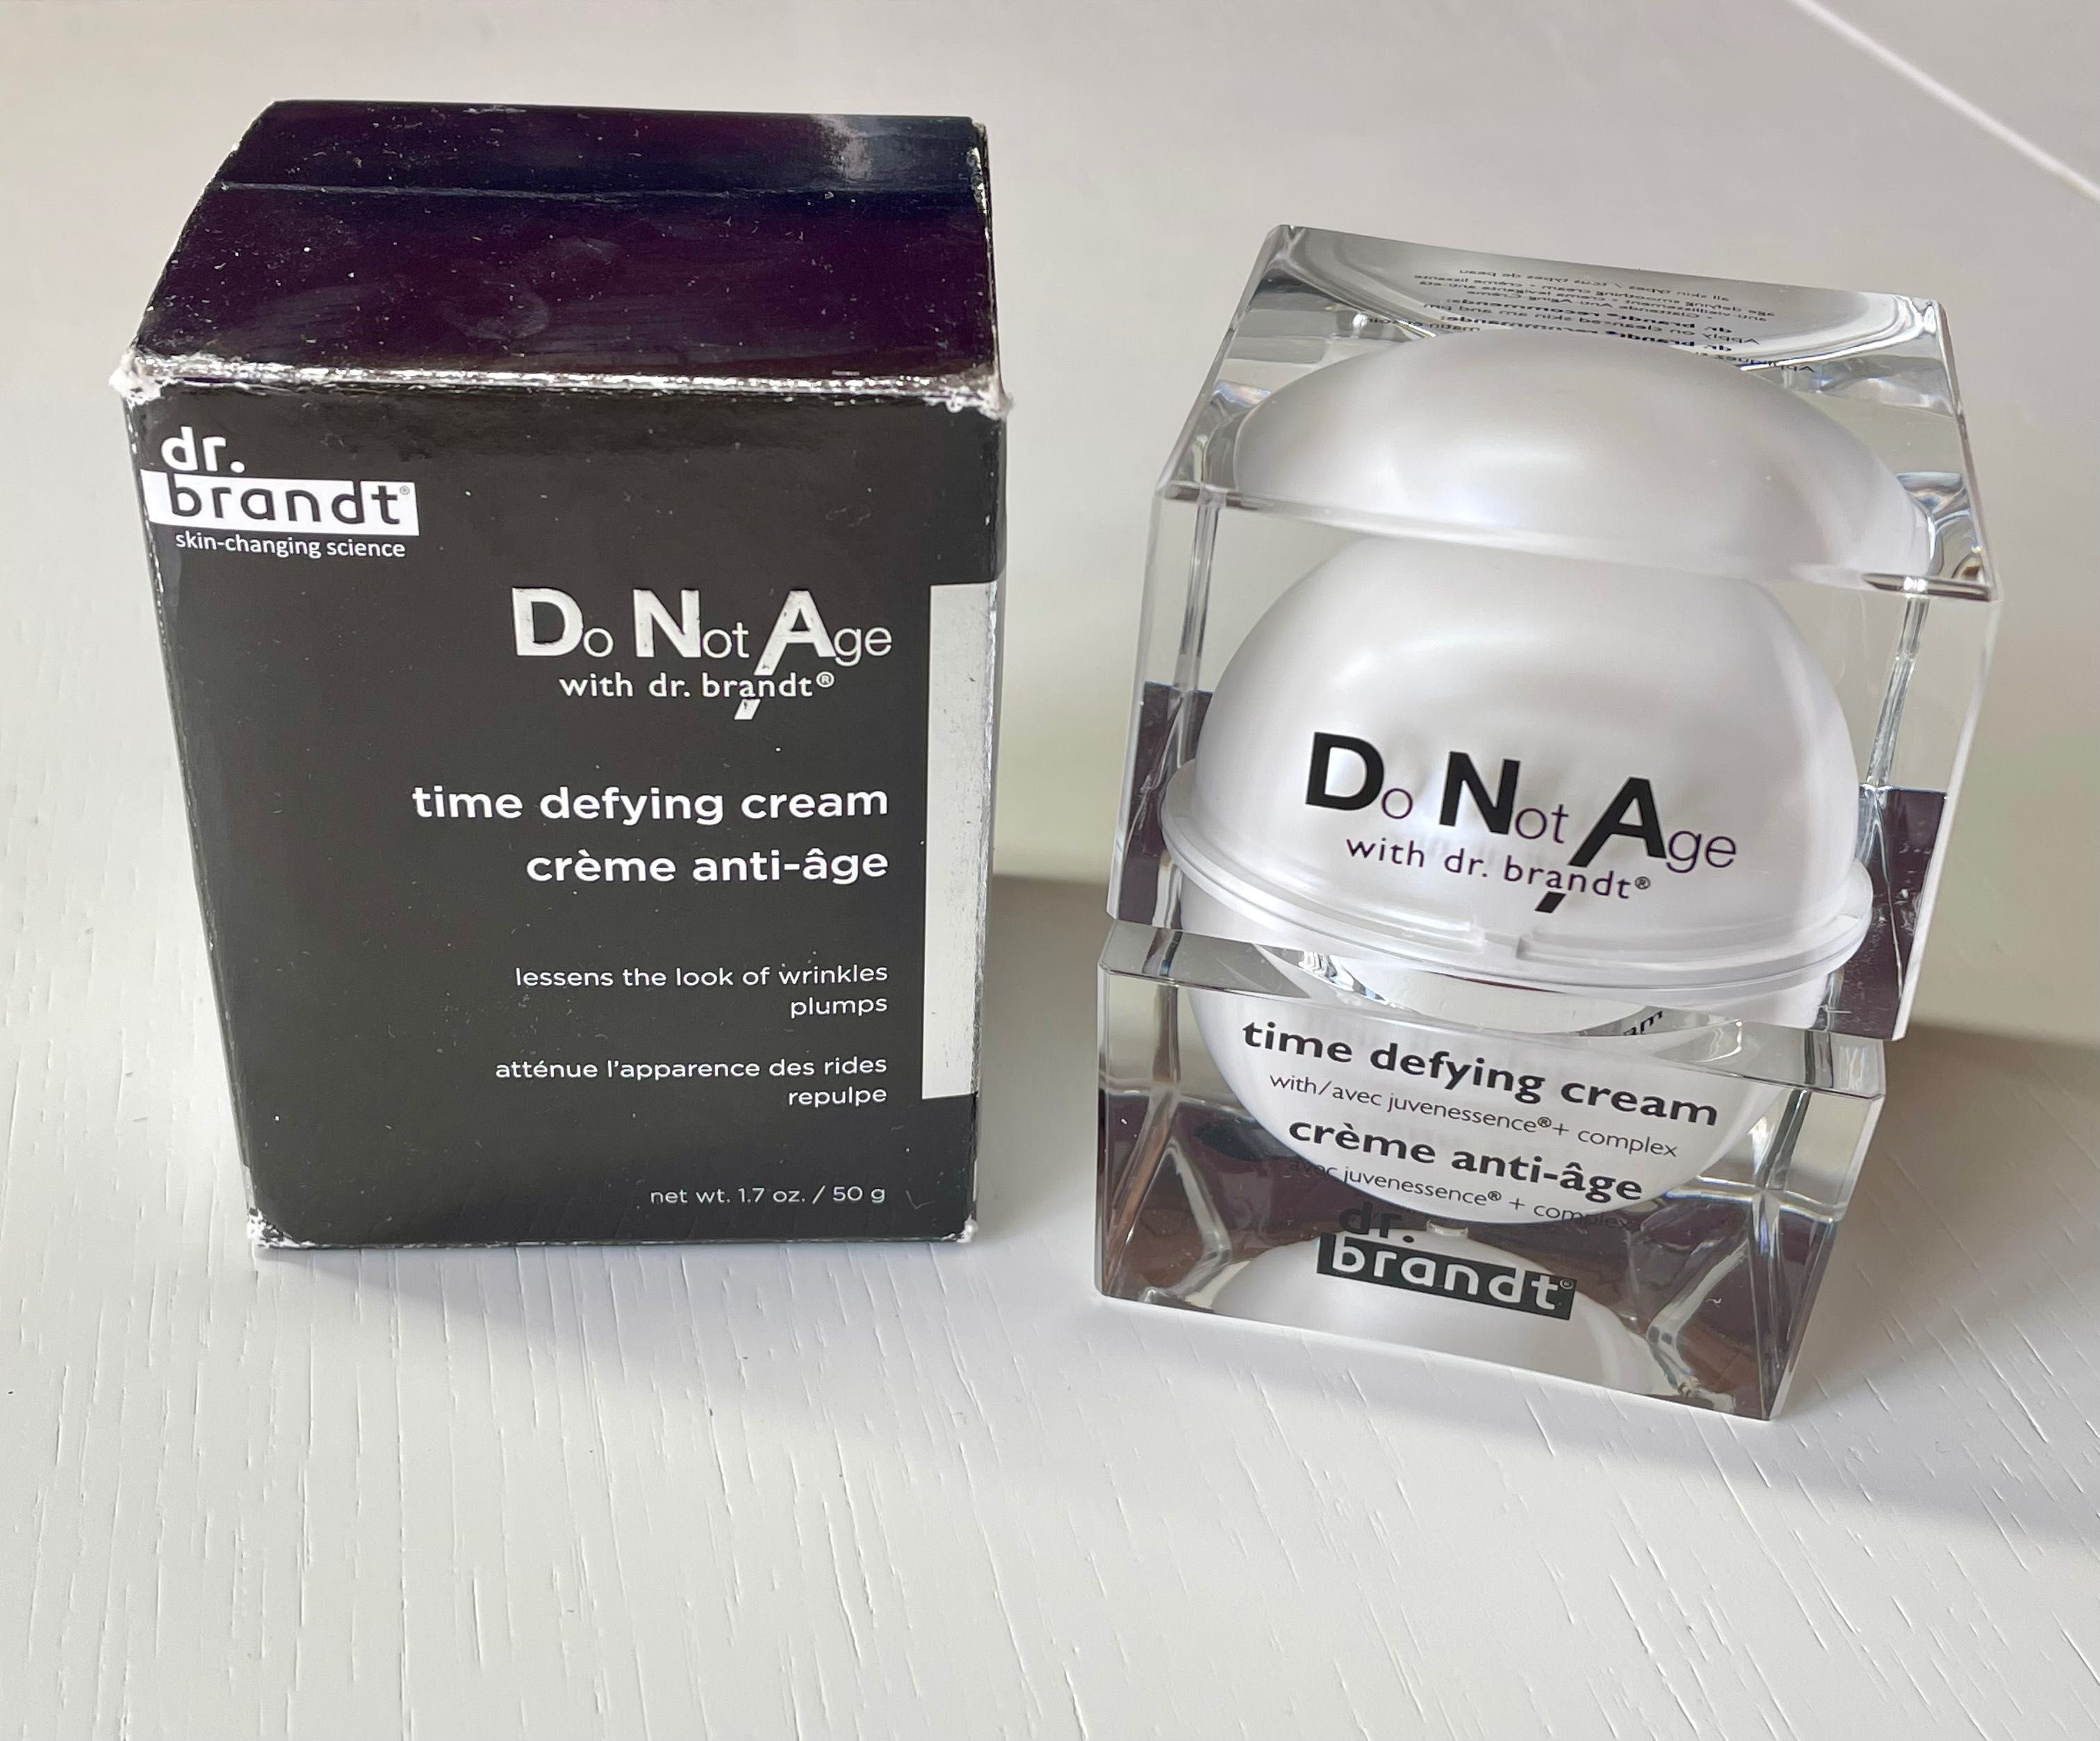 dr. brandt Do Not Age Time Defying Cream 50 g